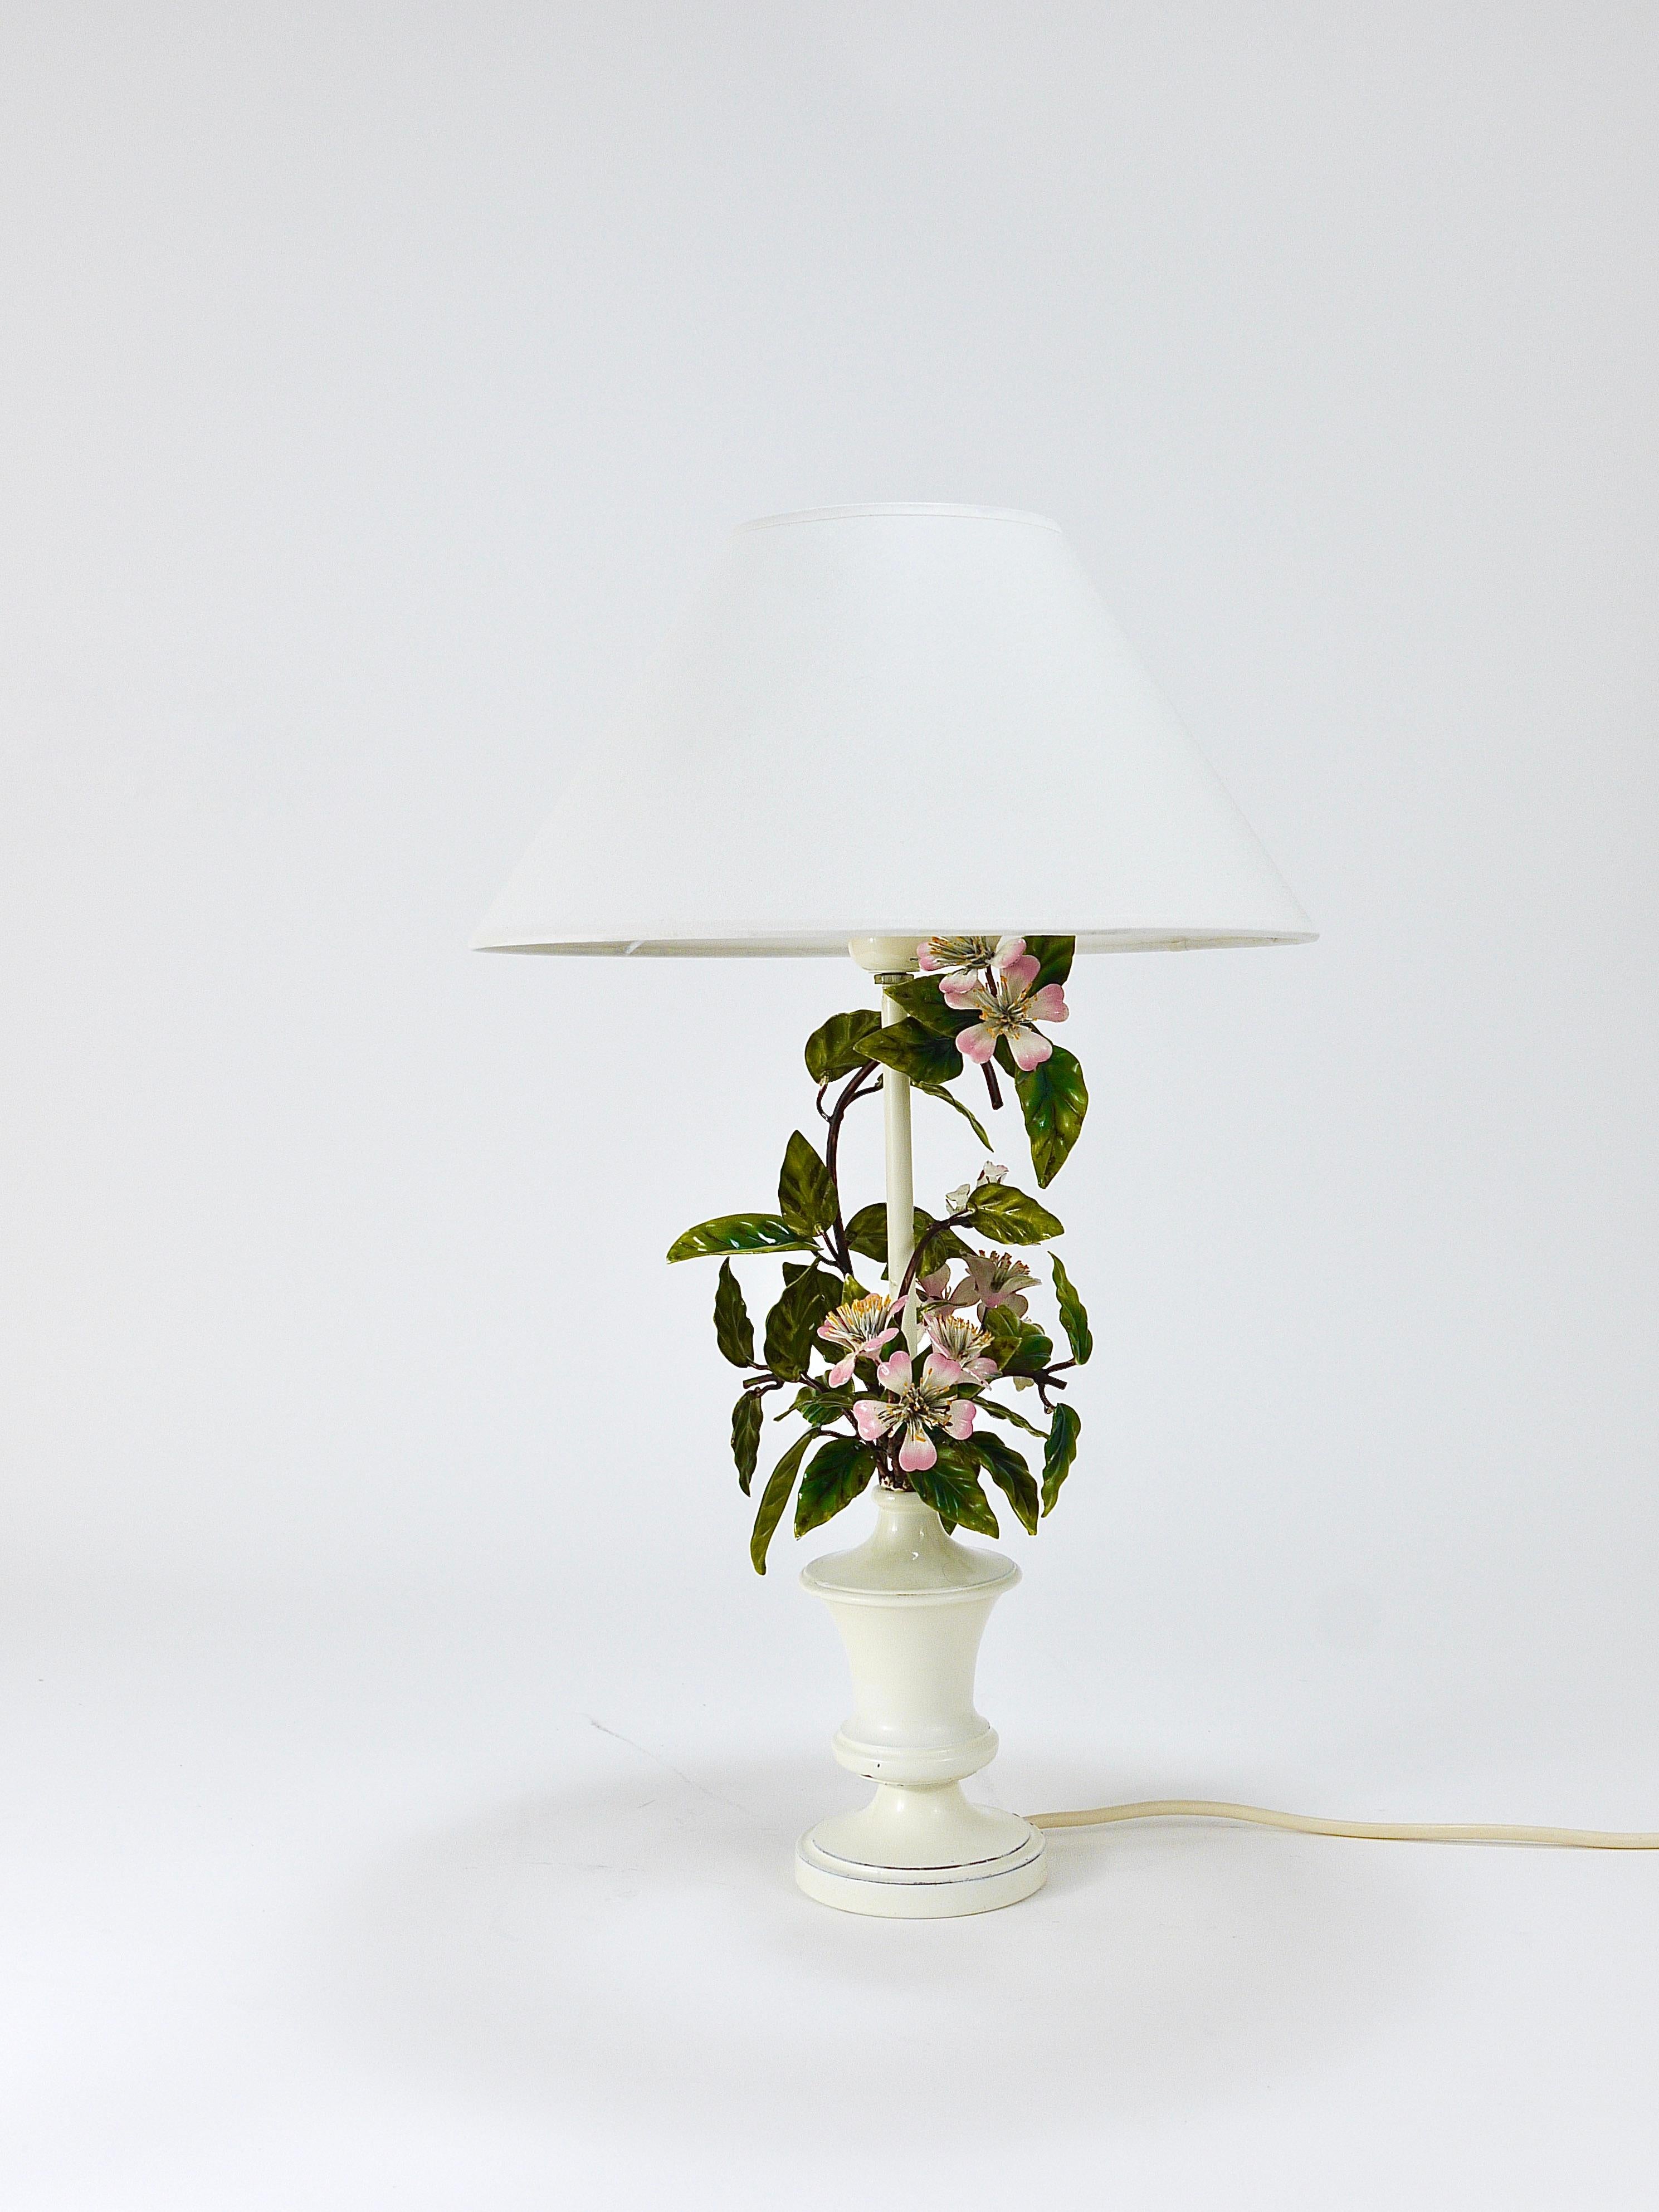 Salvadori Hand Painted Wild Apple Blossom Toleware Table Lamp, Italy, 1950s For Sale 2